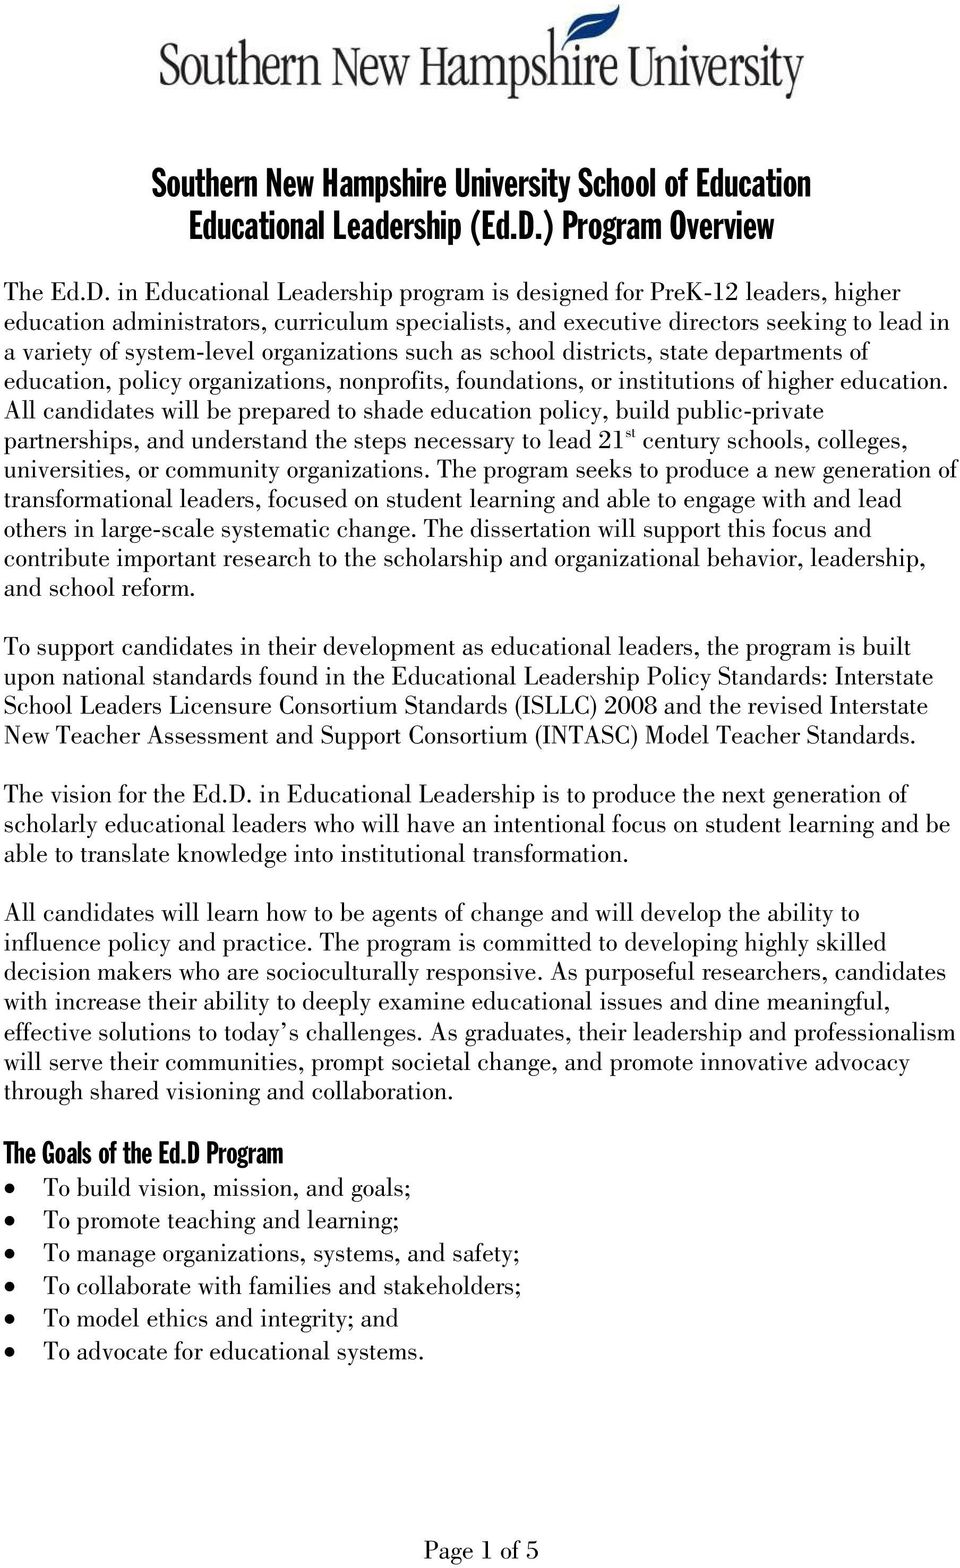 in Educational Leadership program is designed for PreK-12 leaders, higher education administrators, curriculum specialists, and executive directors seeking to lead in a variety of system-level